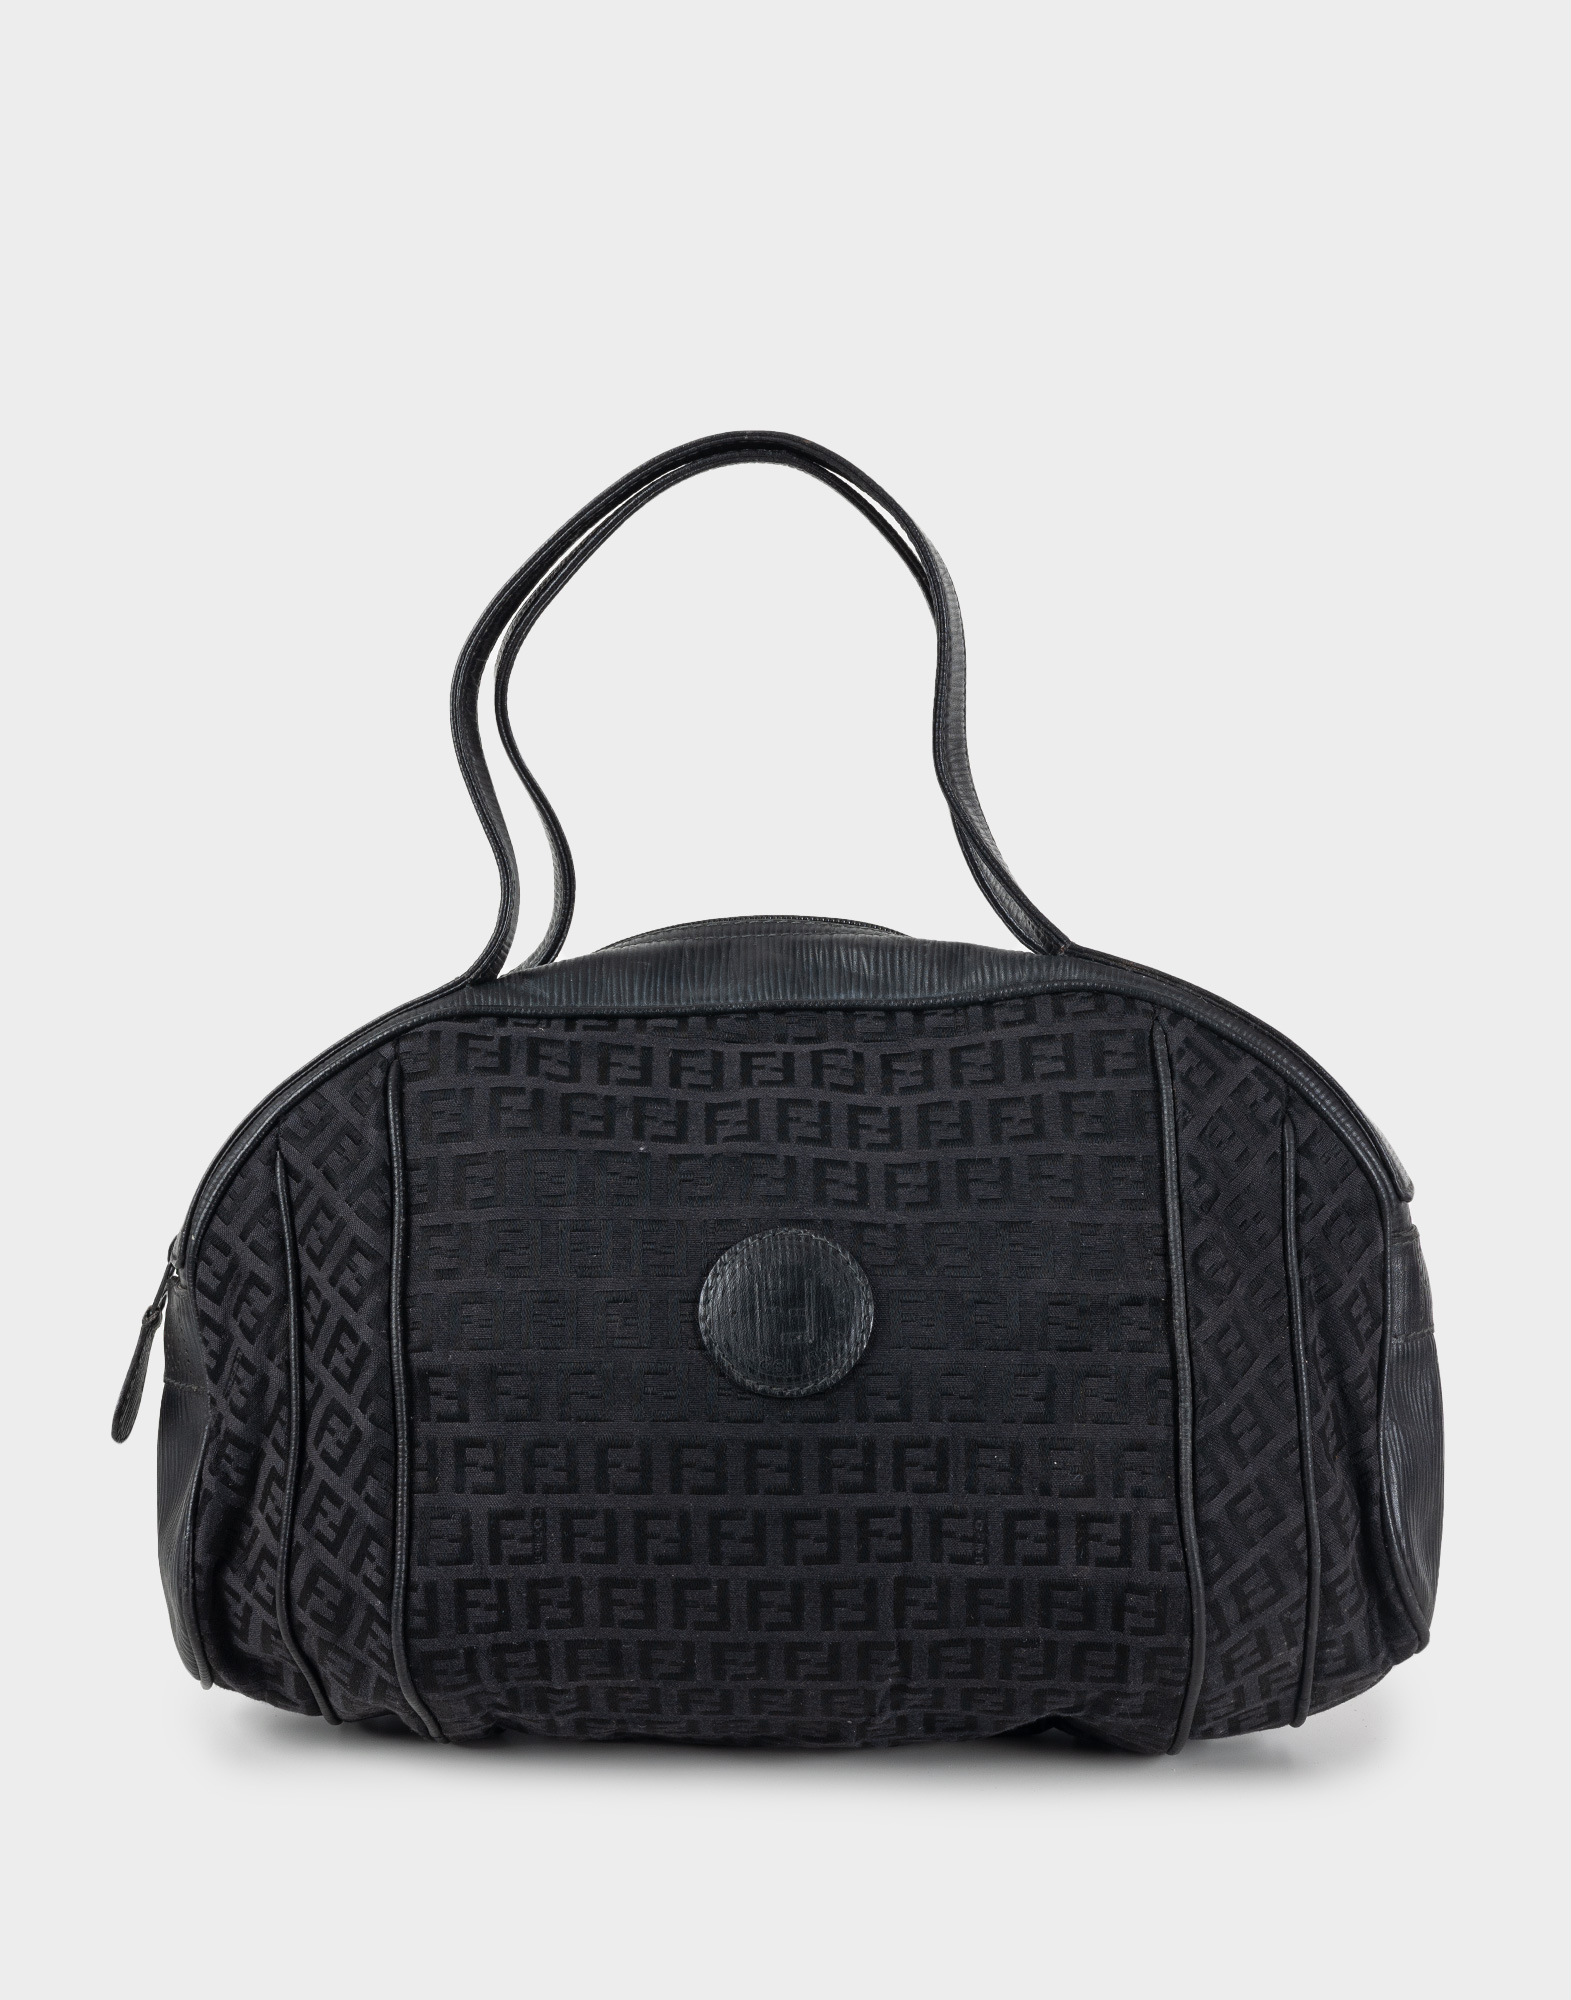 Women's black fabric bag with FF monogram pattern, double leather handle